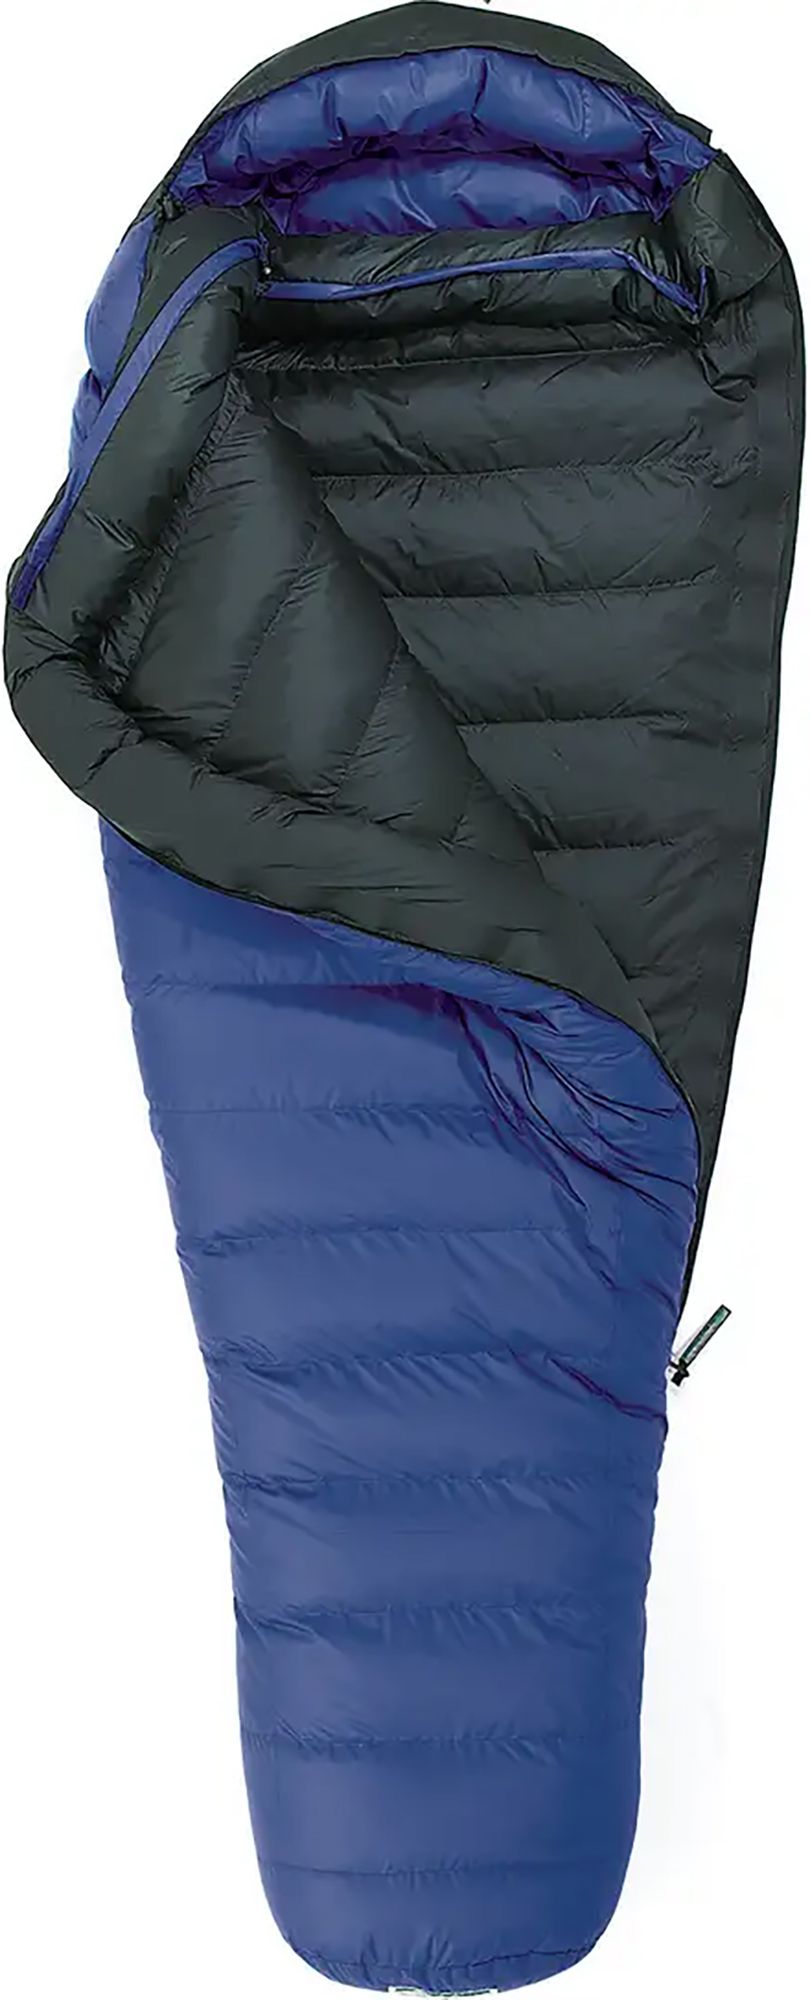 Photos - Suitcase / Backpack Cover Western Mountaineering Antelope MF 5 Sleeping Bag, Right Hand, Men's, Shor